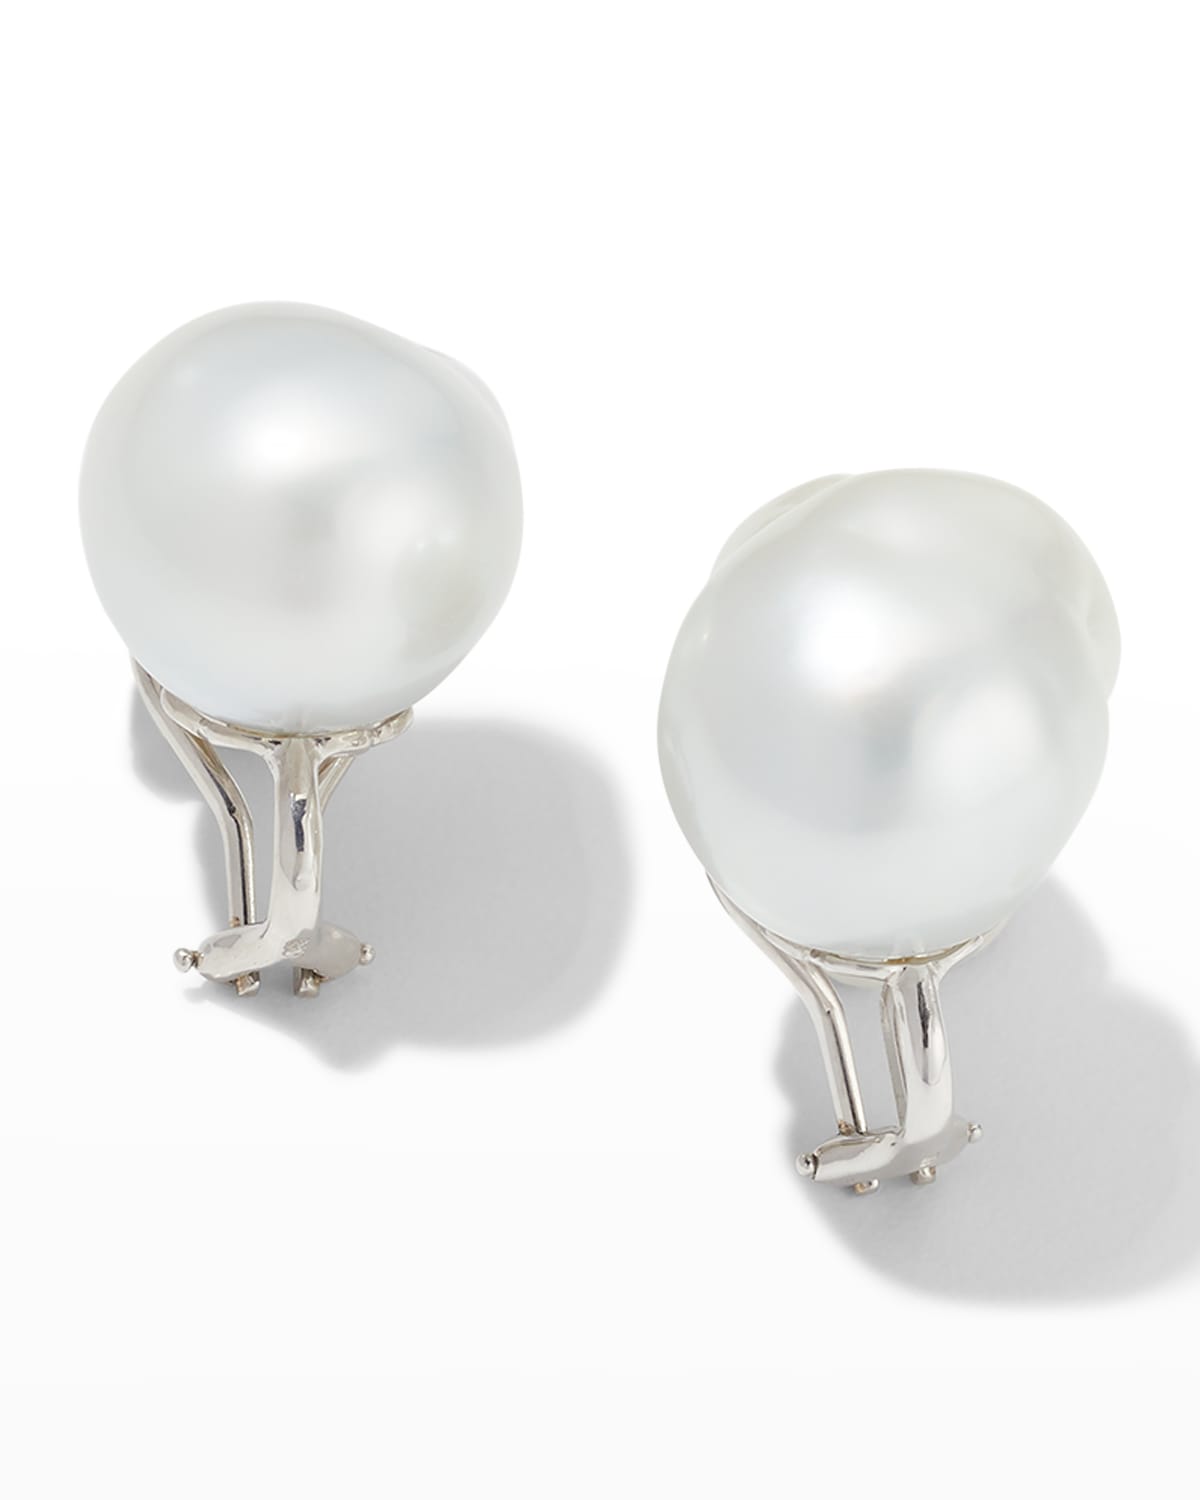 Assael White Gold South Sea Baroque Pearl Earrings, 18.5x15.9x15.3mm